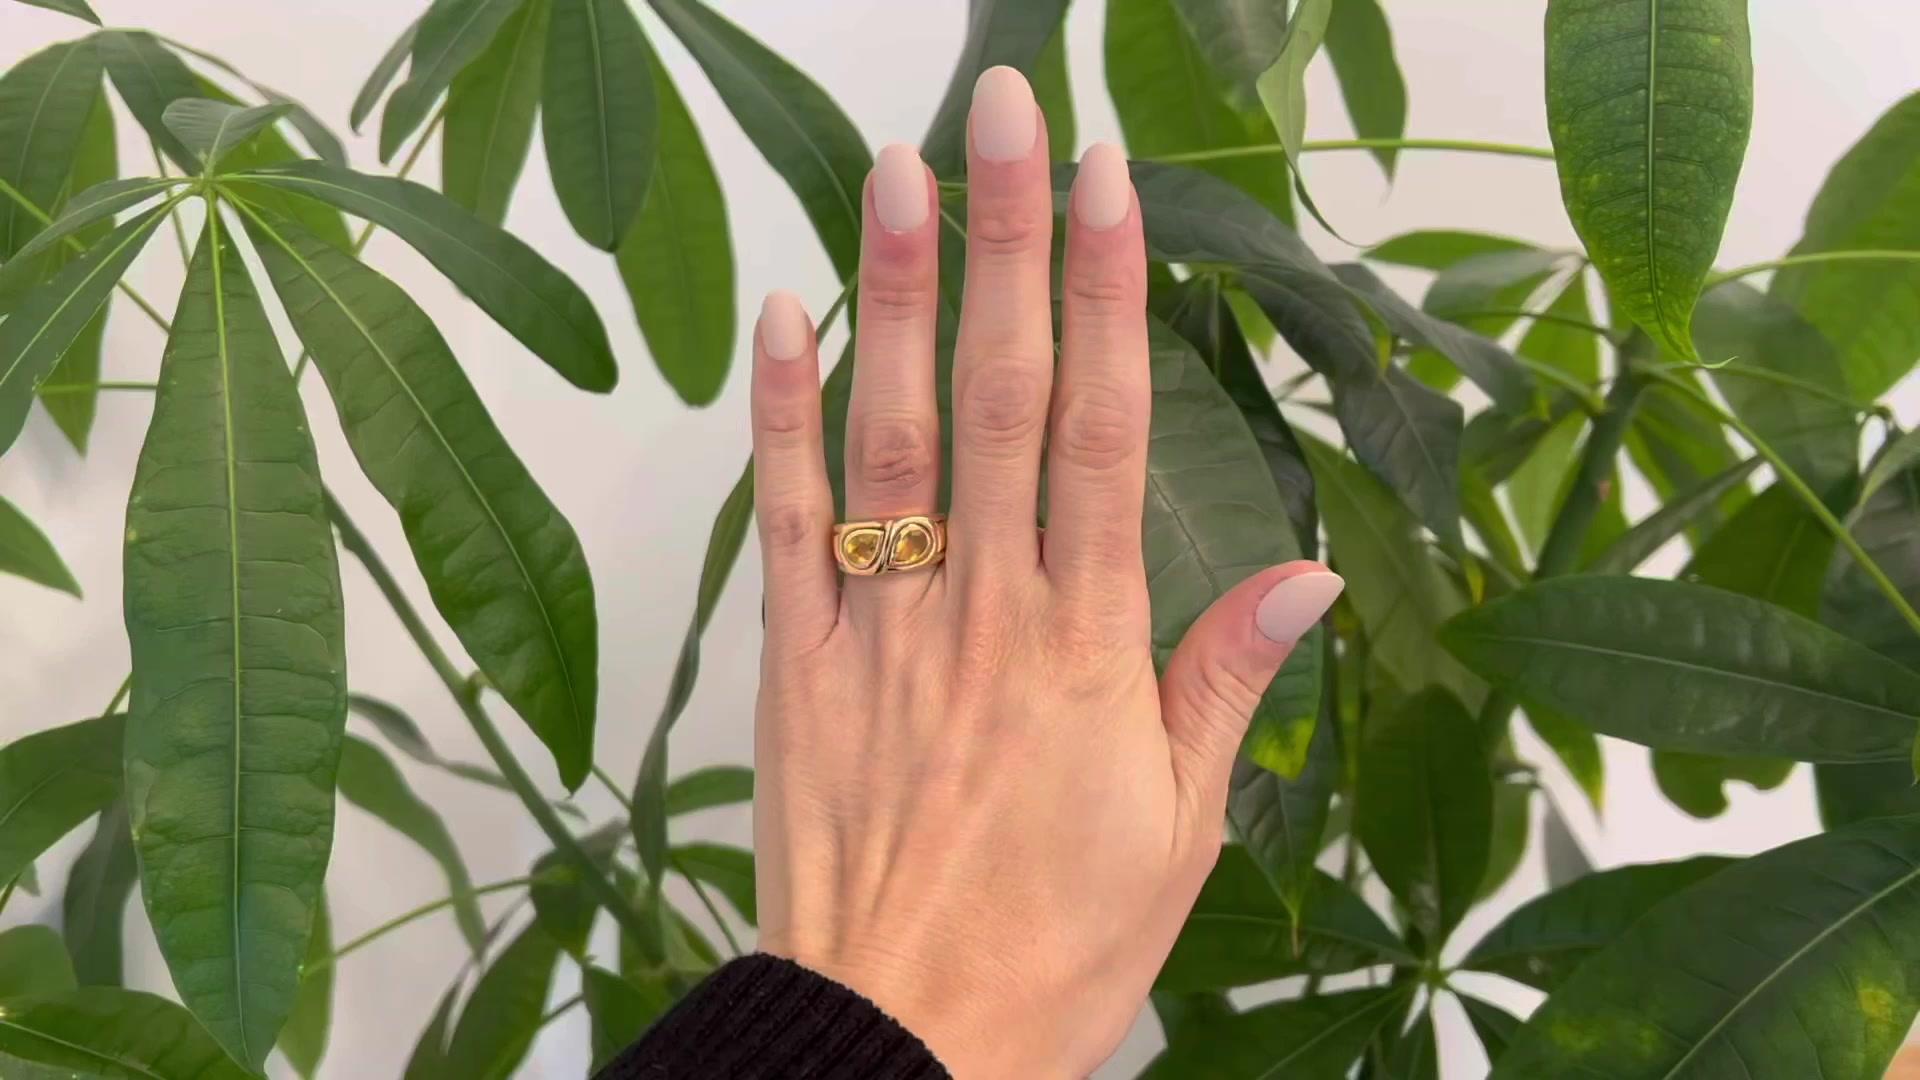 One Bvlgari  1.70 Carat Citrine 18 Karat Yellow Gold Band Ring. Featuring two pear shape cut yellow citrine with a total weight of approximately 1.70 carats. Crafted in 18 karat yellow gold with an 18 karat white gold interior band signed Bvlgari